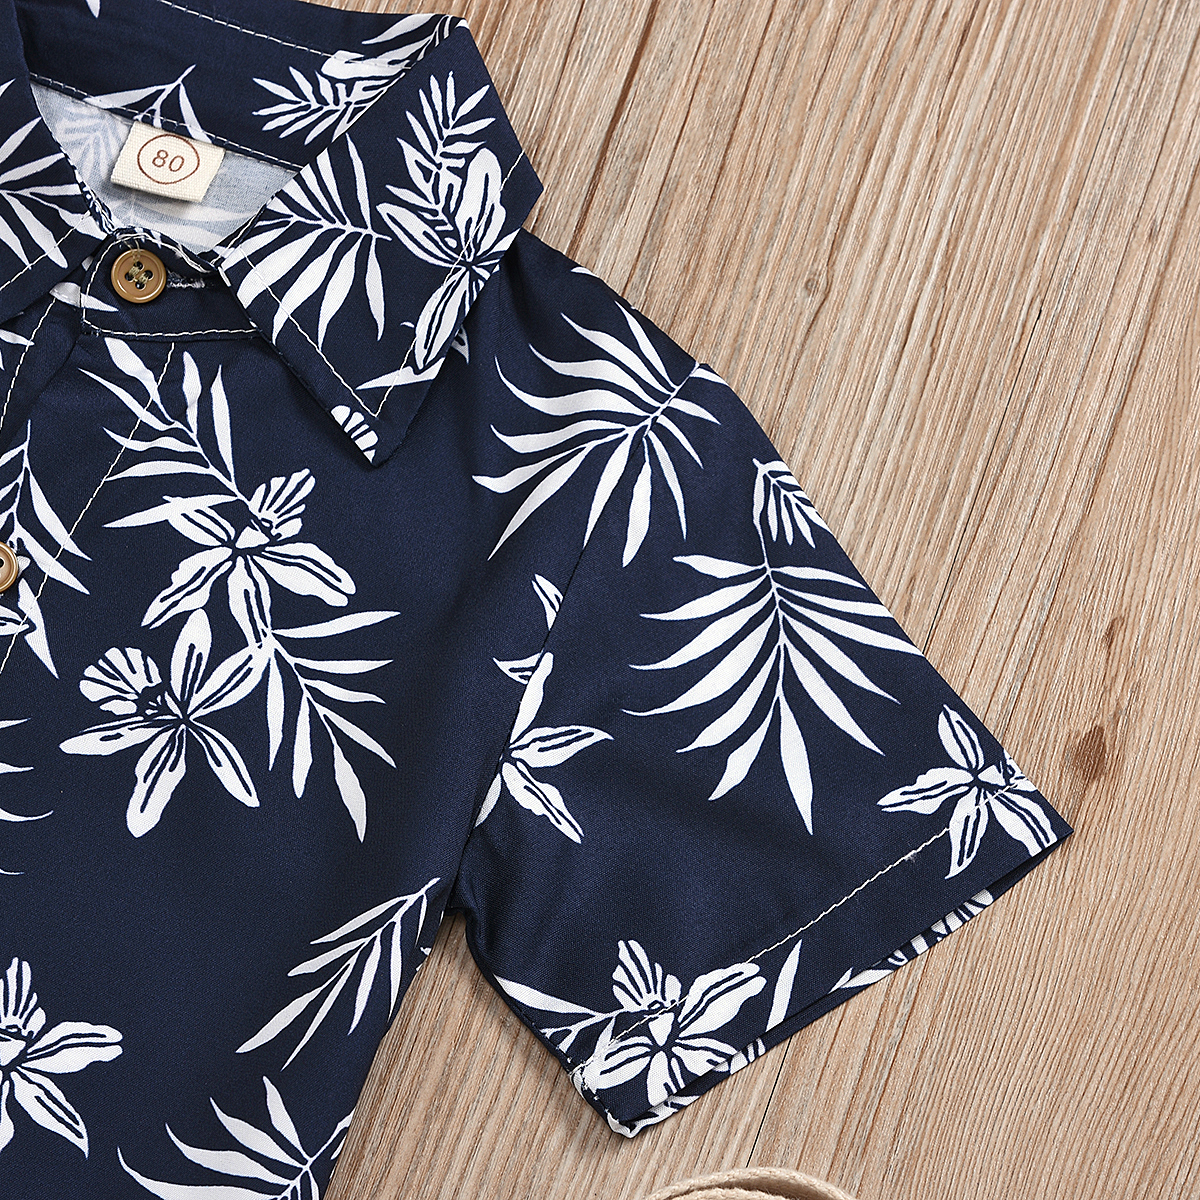 2020 Summer Infant Baby Boys Clothes Sets Print Short Sleeve Shirts Tops+Shorts Trousers Beach Sets